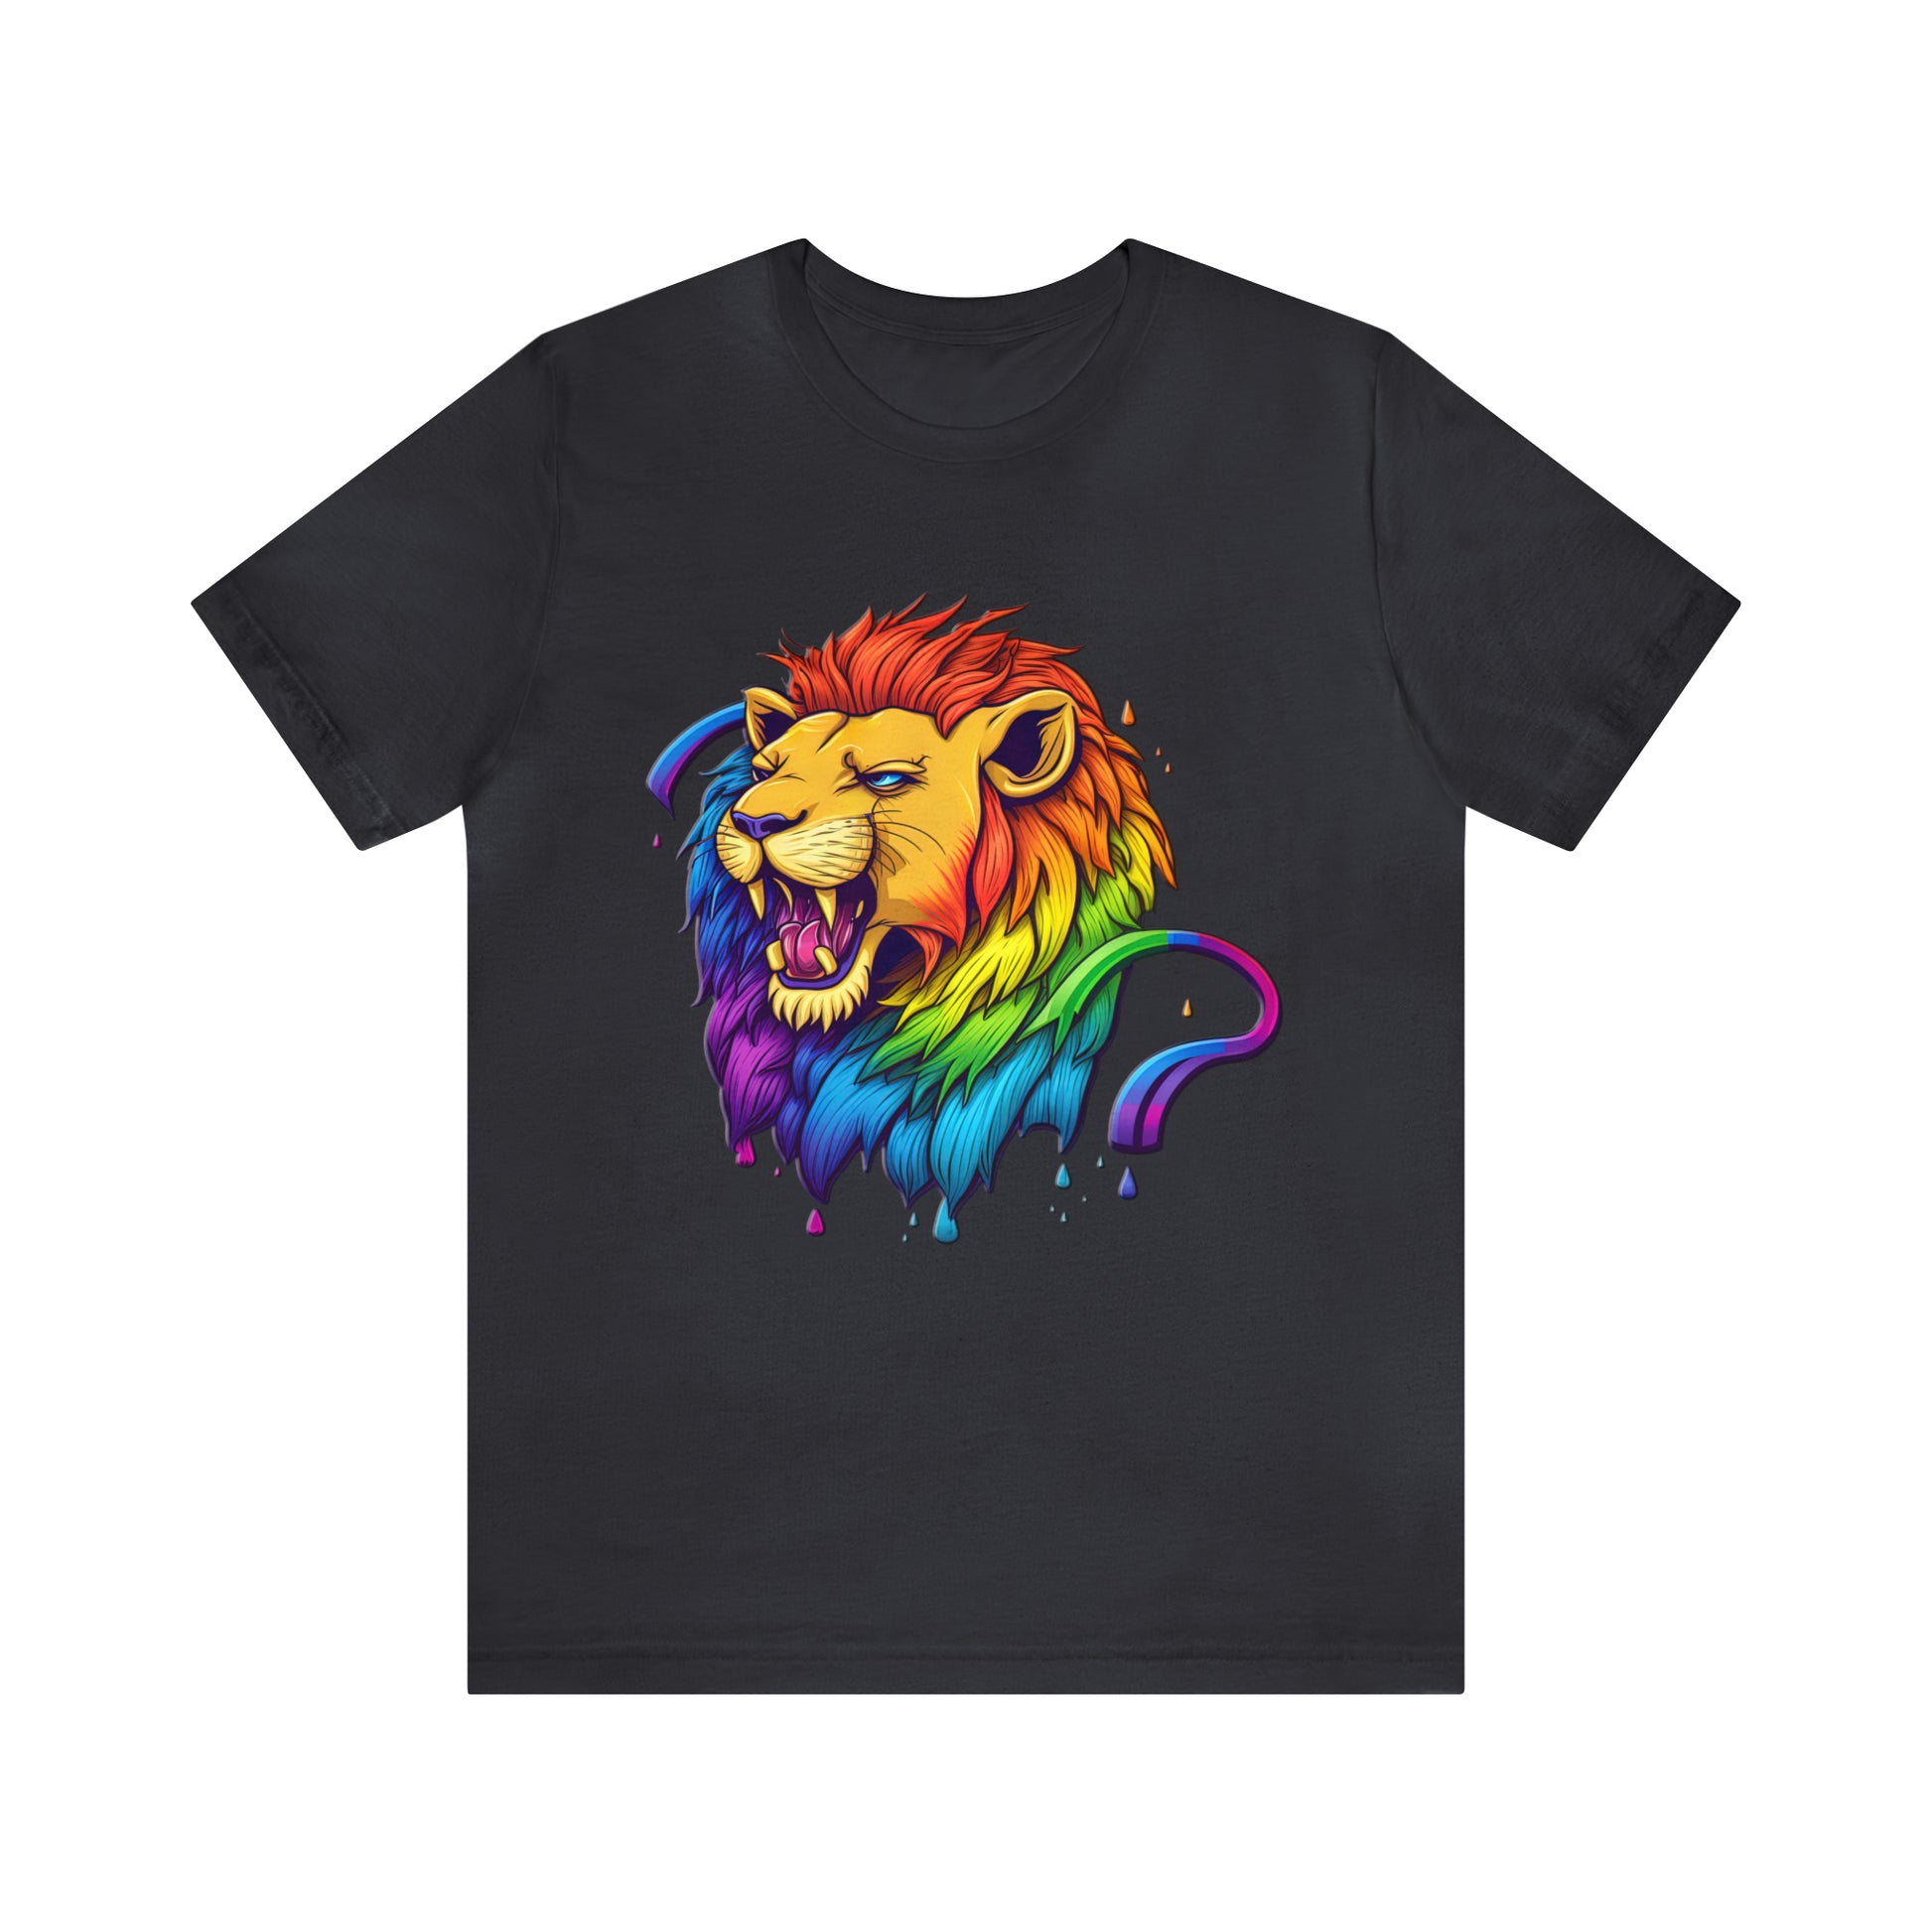 psychedelicBRANDz's Neon Jungle King featuring a majestic lion on a dark grey shirt